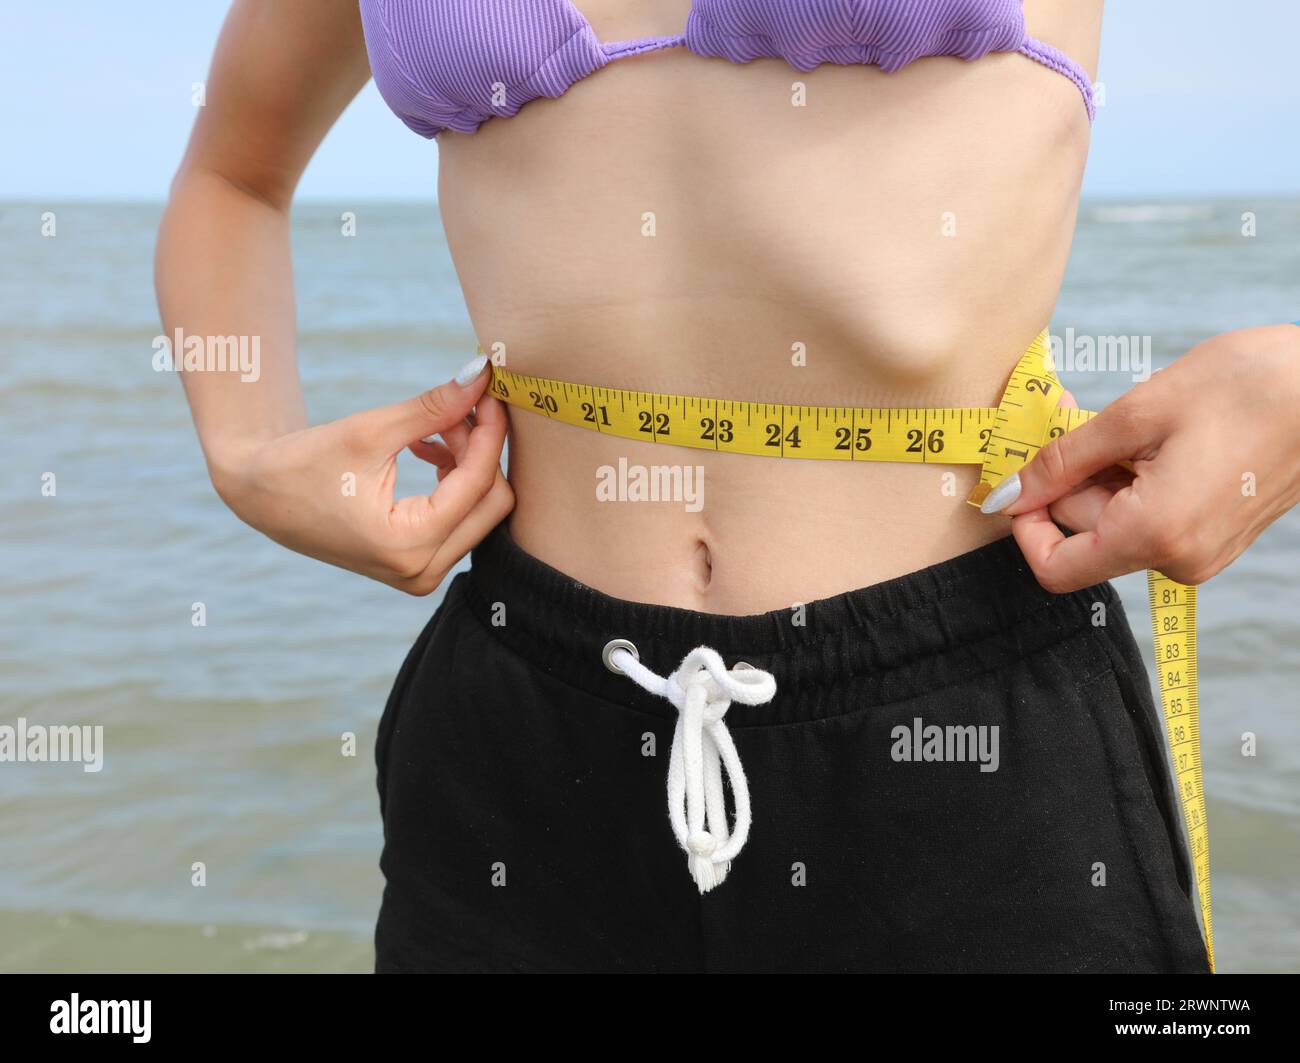 skinny young girl with eating disorder measuring ther waistline Stock Photo